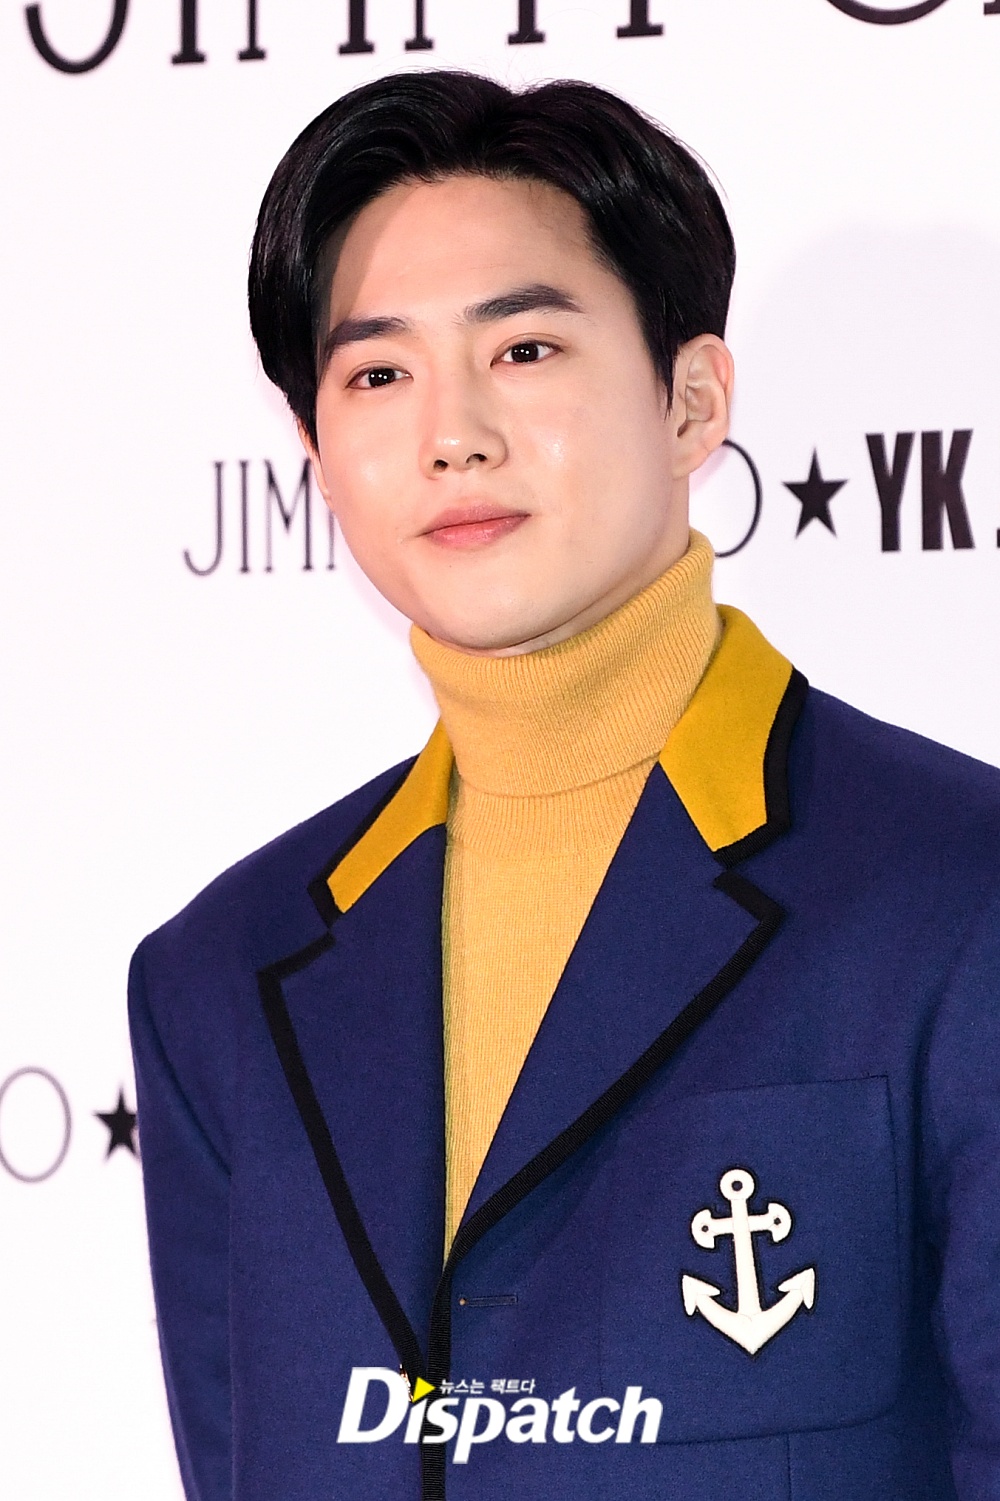 EXO Suho attended the brand event held at the Nonhyeon-dong dress garden in Gangnam-gu, Seoul on the afternoon of the 9th day.Suho was impressed with his clear skin without any blemishes on the day.shiny honey skina meeting free pass award